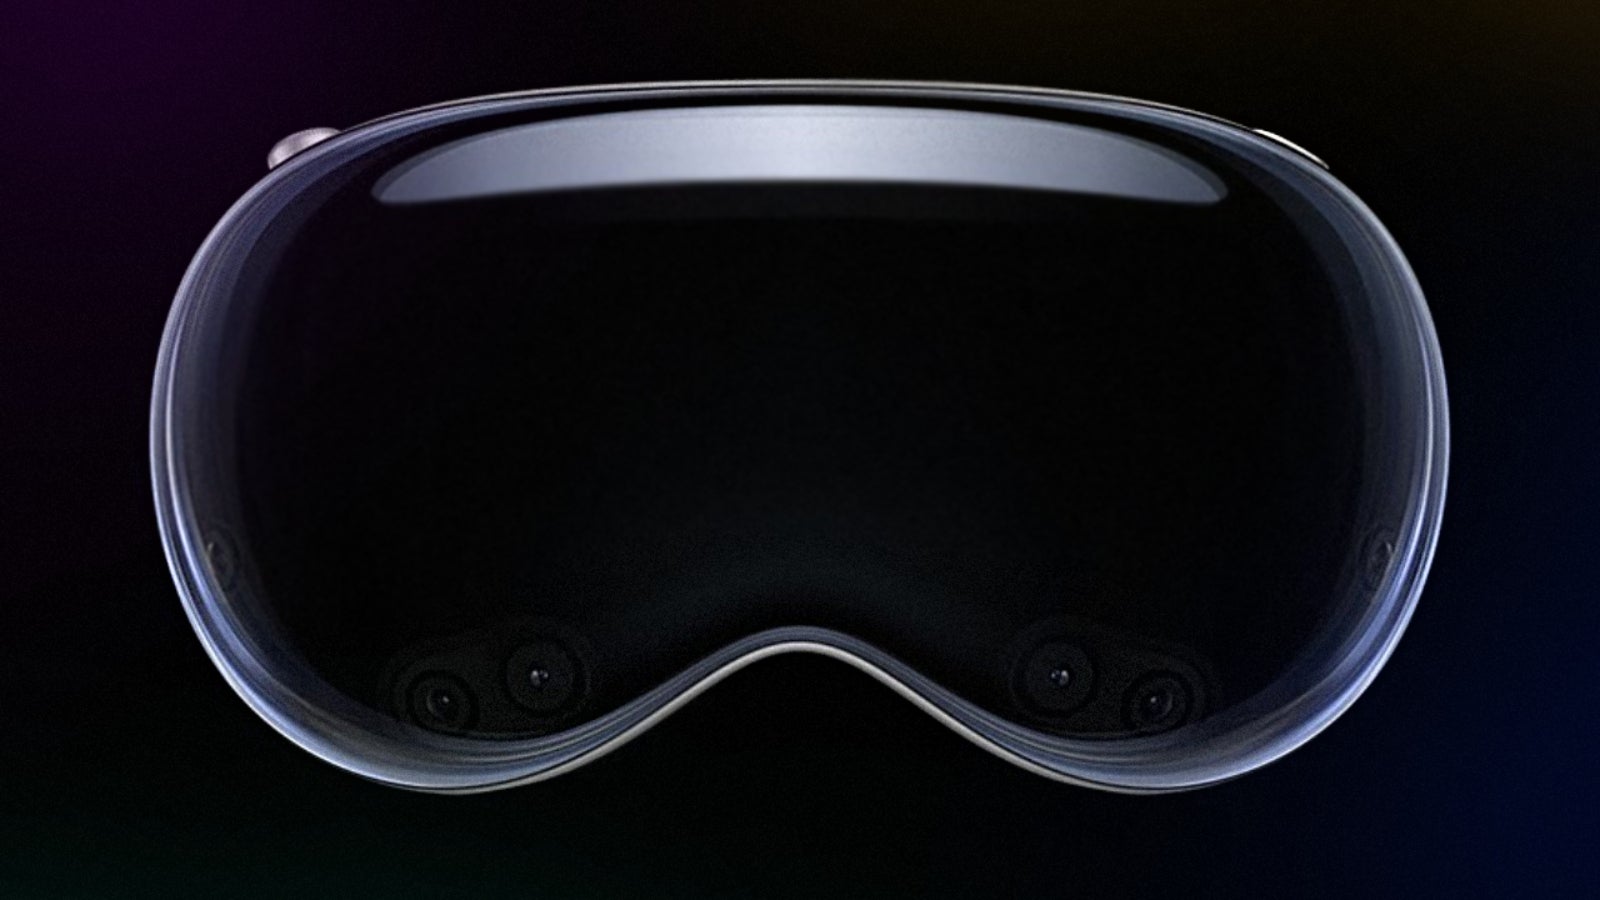 Even if you don’t get a Vision Pro, 2024 may be the year you get a VR headset. Here’s why